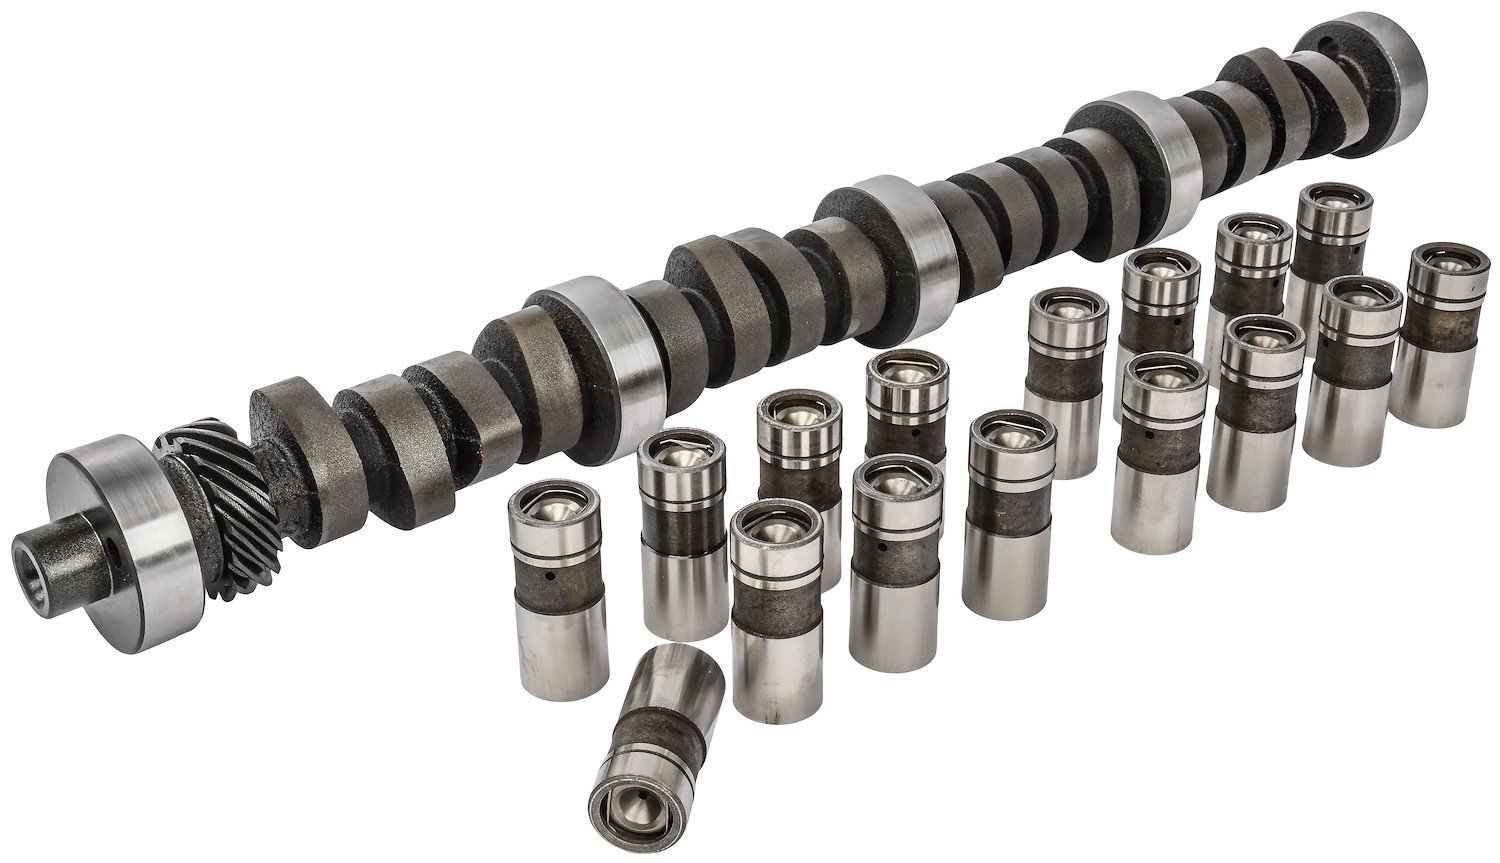 Hydraulic Flat Tappet Camshaft & Lifters for 1970-1982 Ford 351C/M, 400